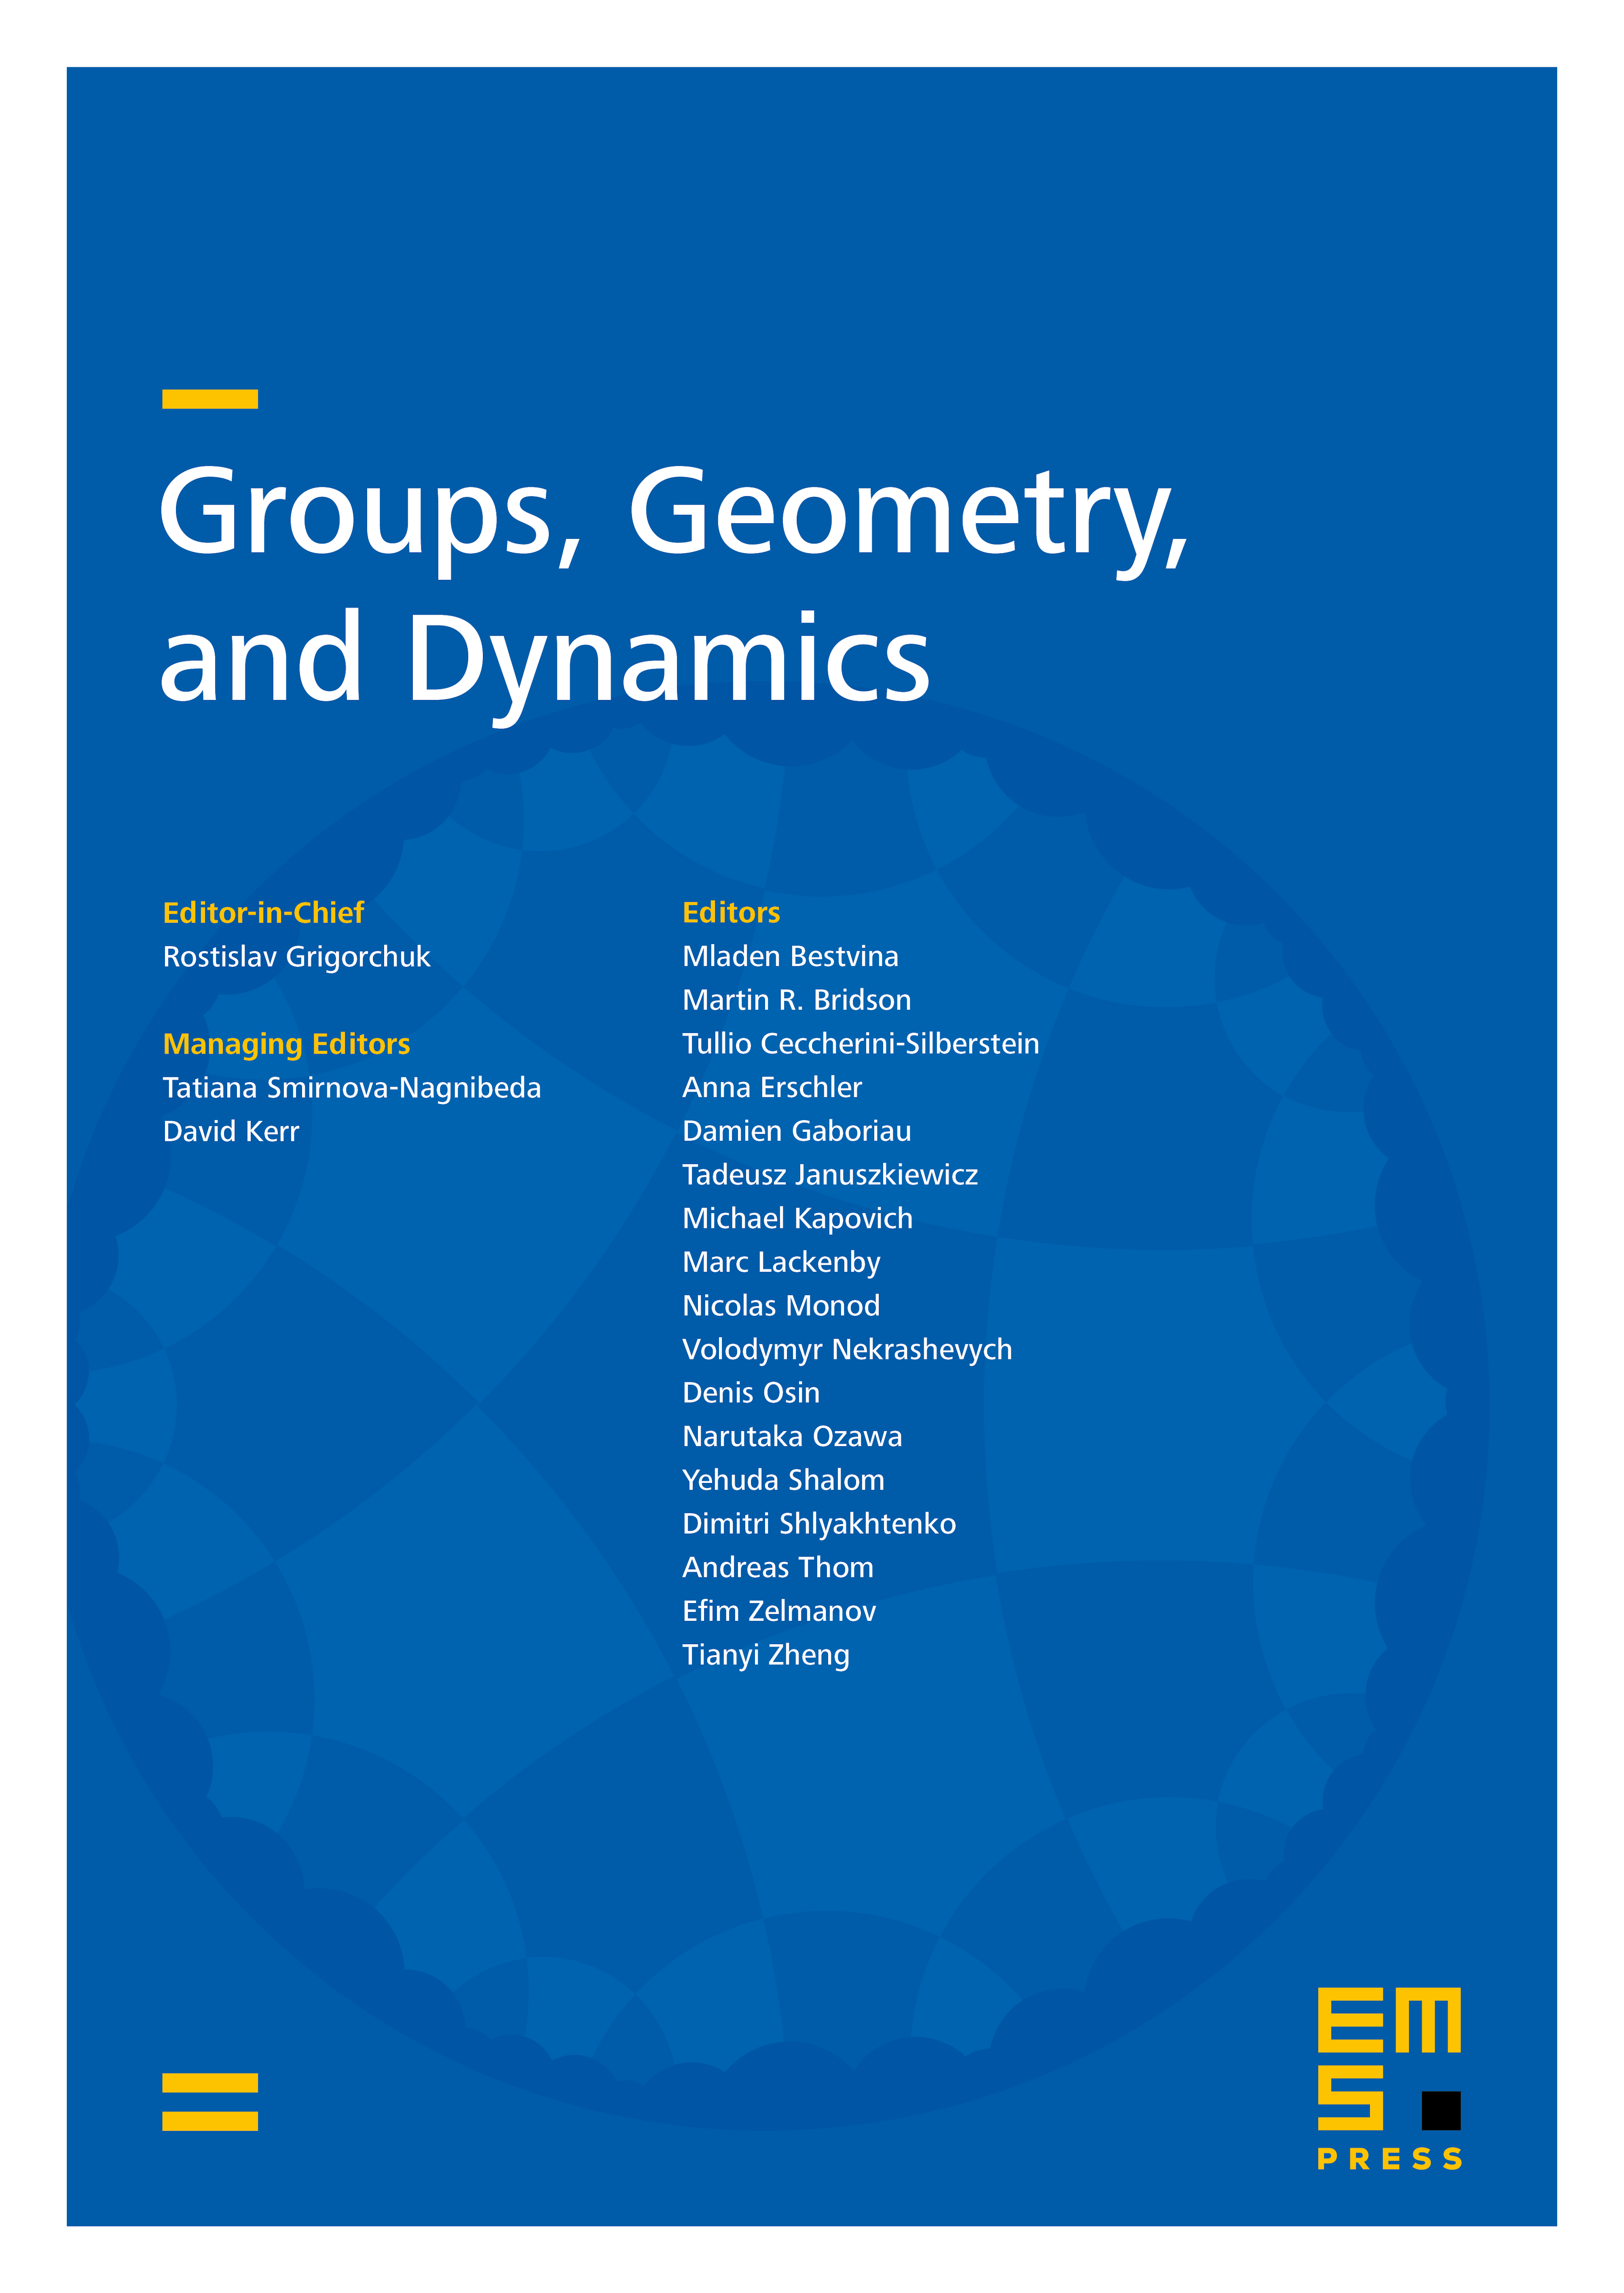 Groups, Geometry, and Dynamics cover